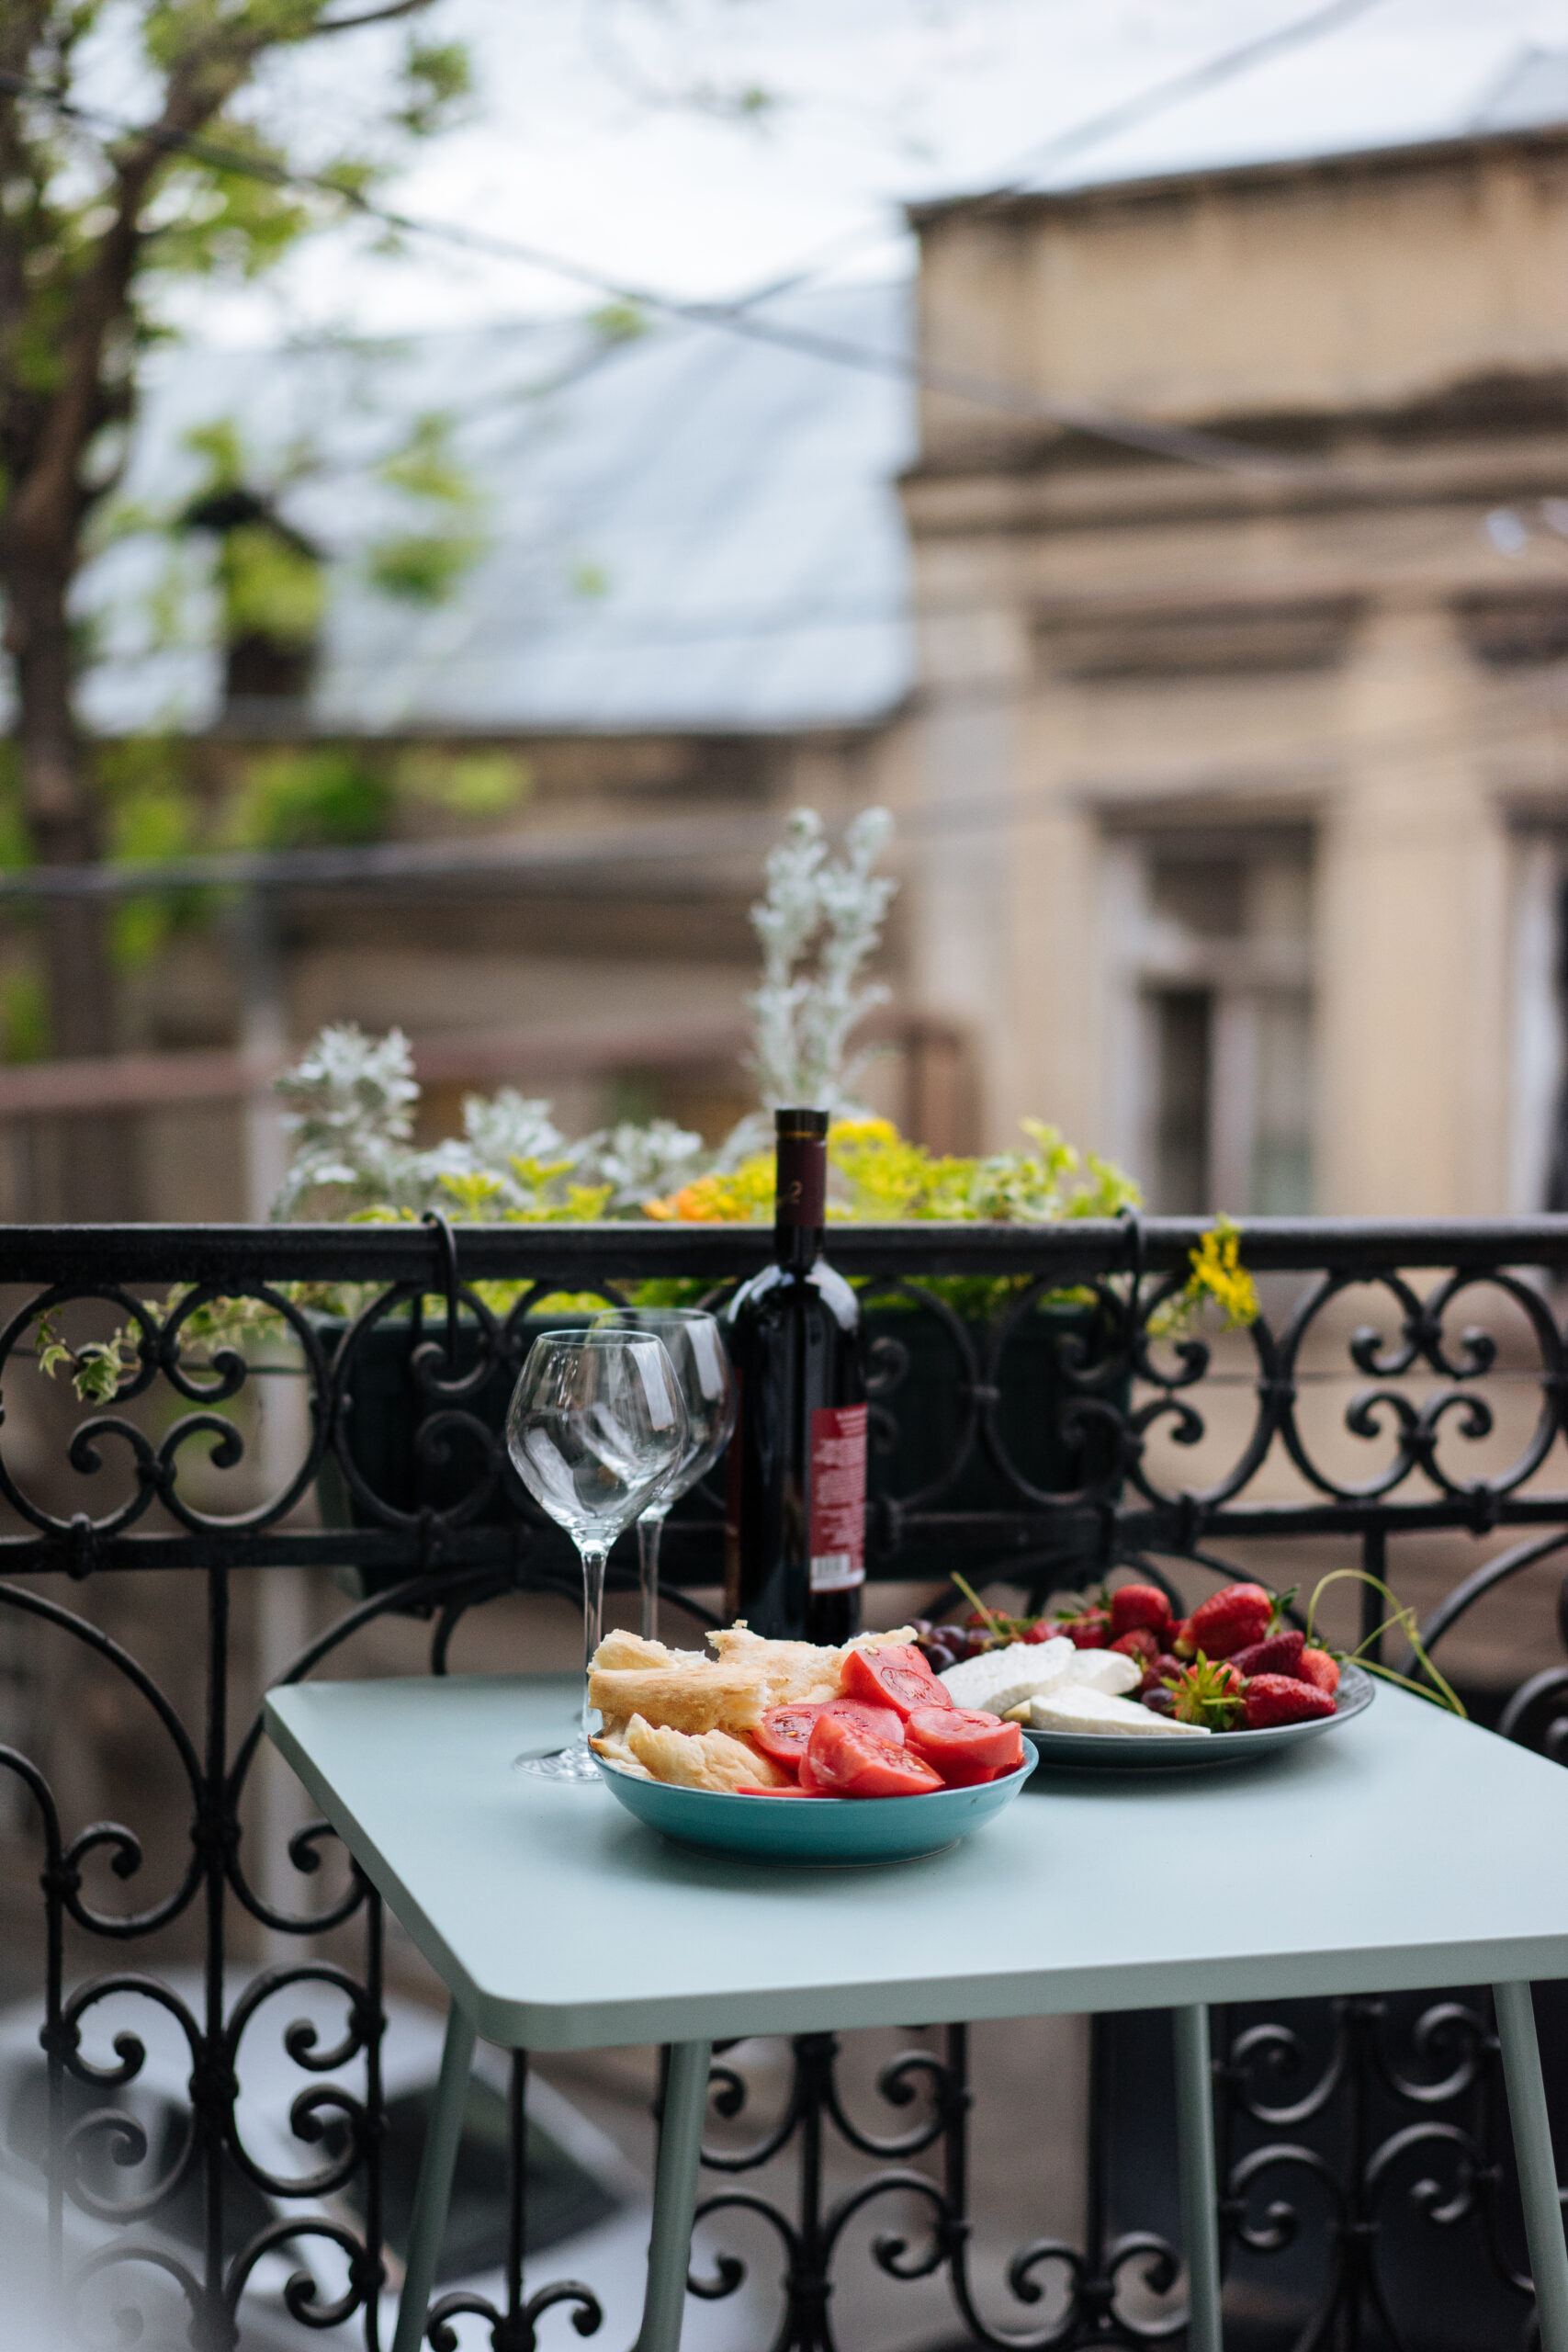 Bottle of wine and delicate glasses with high stems standing on table with sliced tomatoes, bread, cheese and berries lying on plates with ornamental fence and plants on background